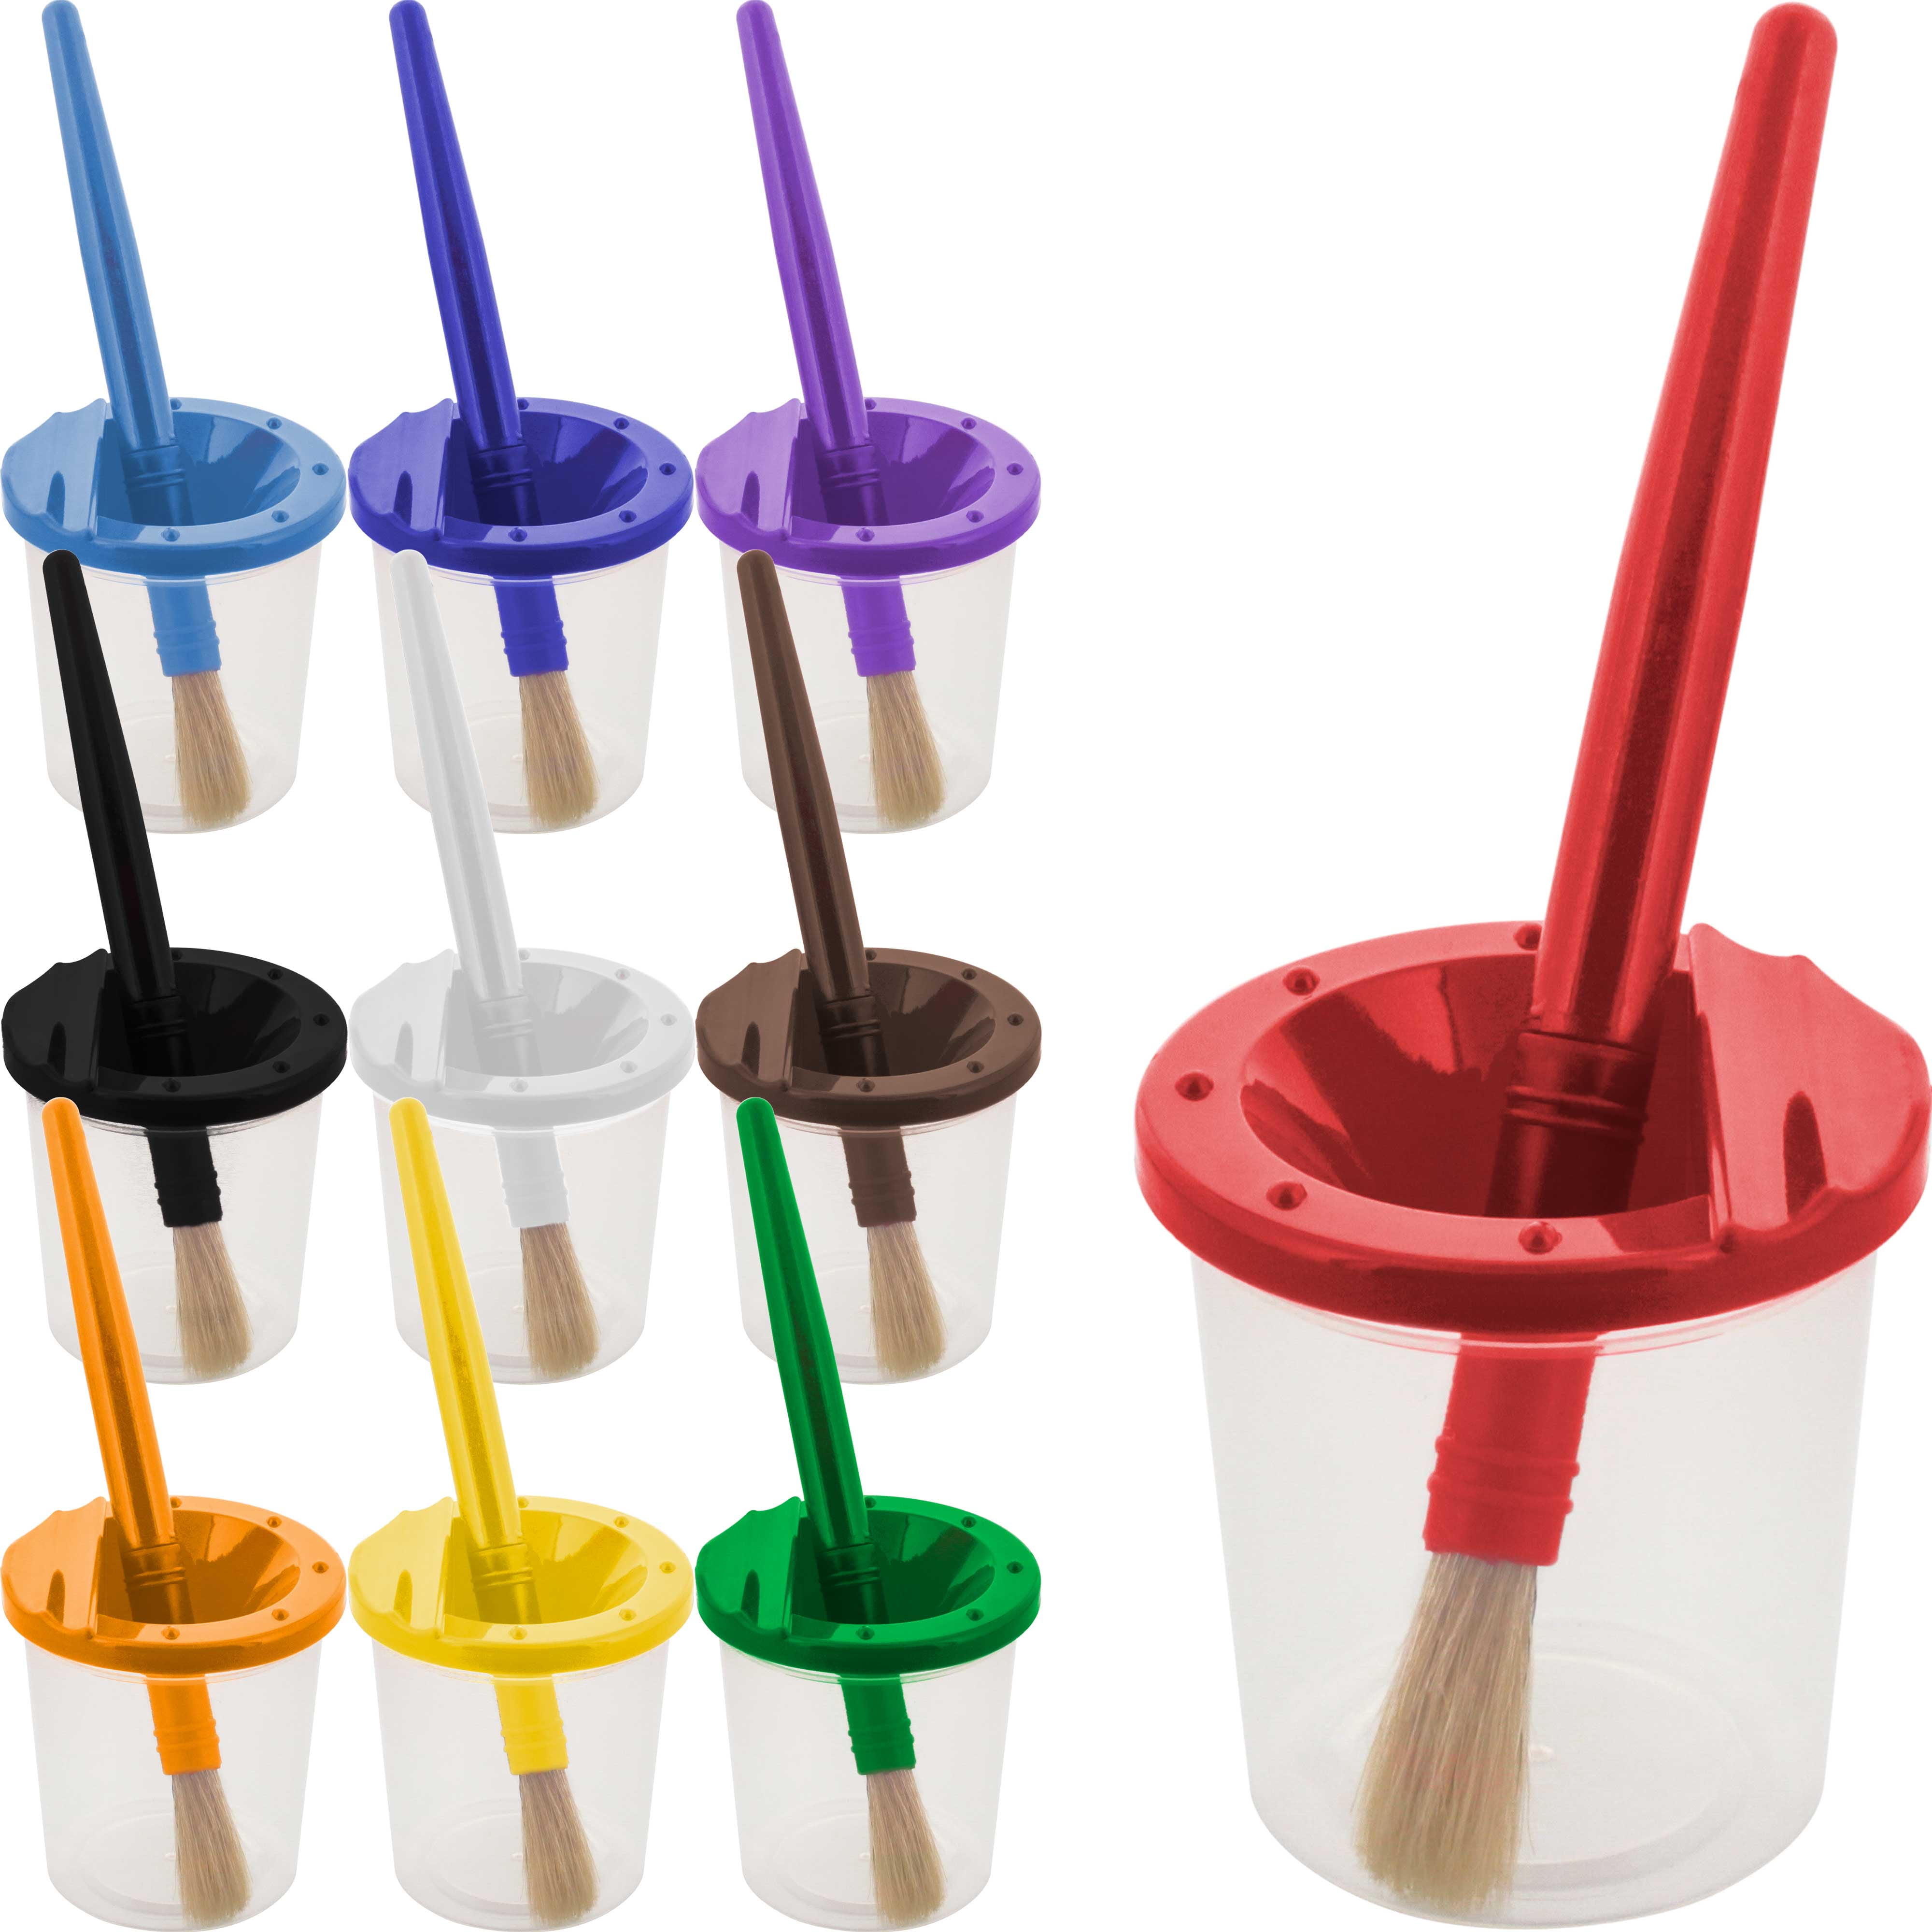 U.S. Art Supply 10 Piece Children's No Spill Paint Cups with Colored Lids and 10 Piece Large Round Brush Set with Plastic Handles